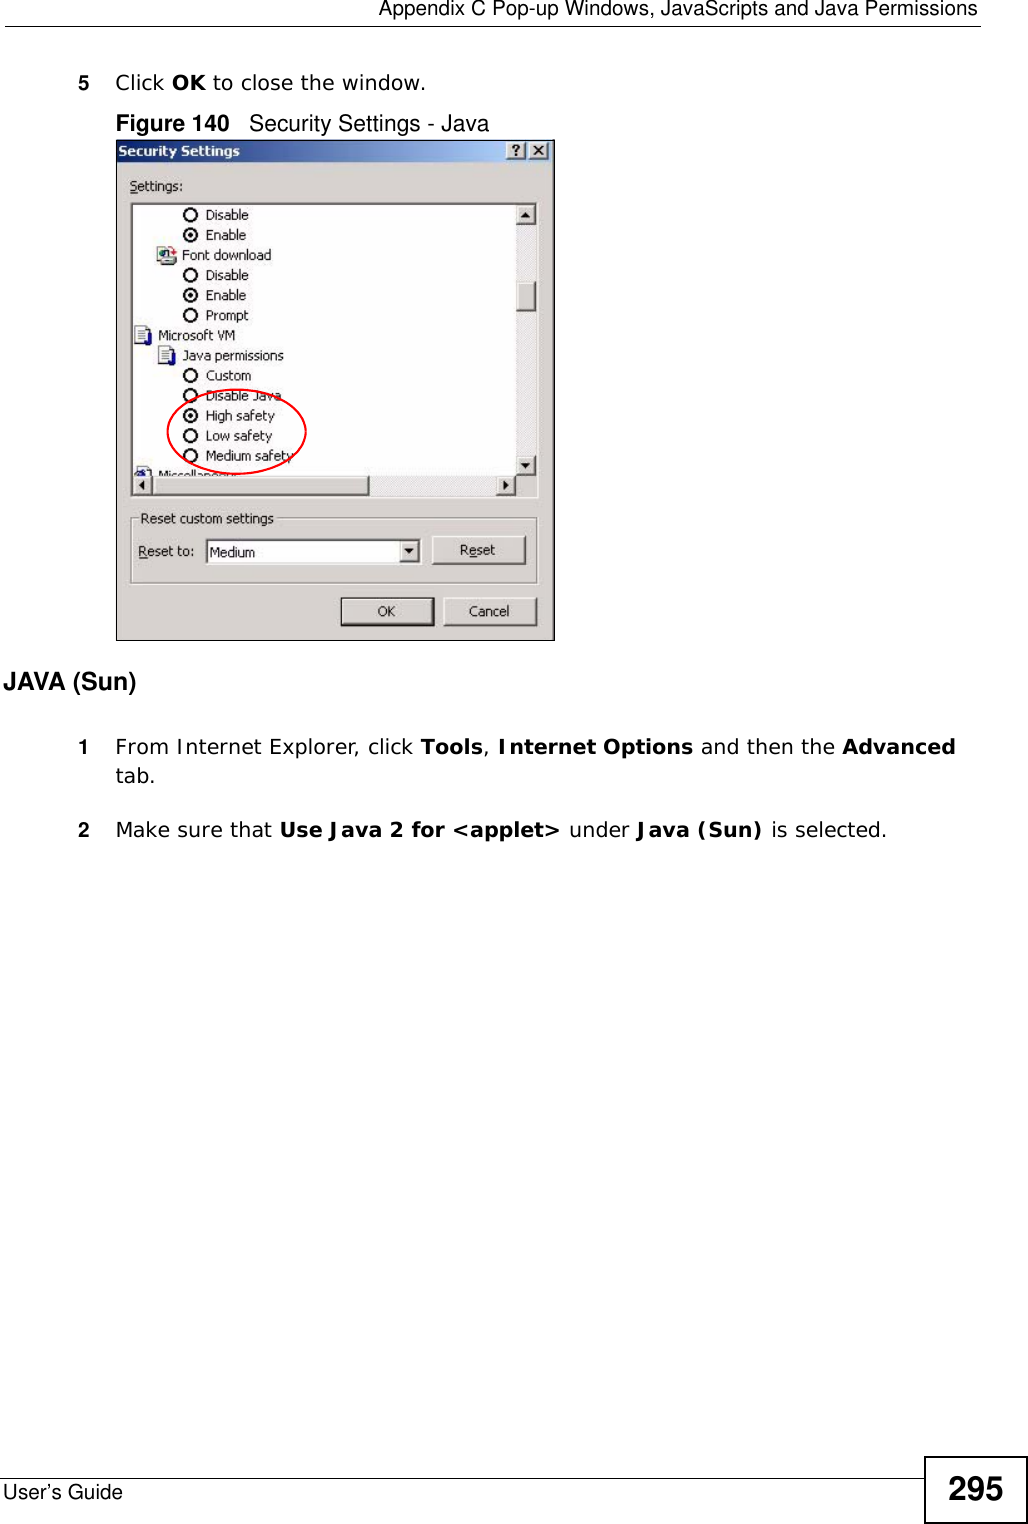  Appendix C Pop-up Windows, JavaScripts and Java PermissionsUser’s Guide 2955Click OK to close the window.Figure 140   Security Settings - Java JAVA (Sun)1From Internet Explorer, click Tools, Internet Options and then the Advanced tab. 2Make sure that Use Java 2 for &lt;applet&gt; under Java (Sun) is selected.